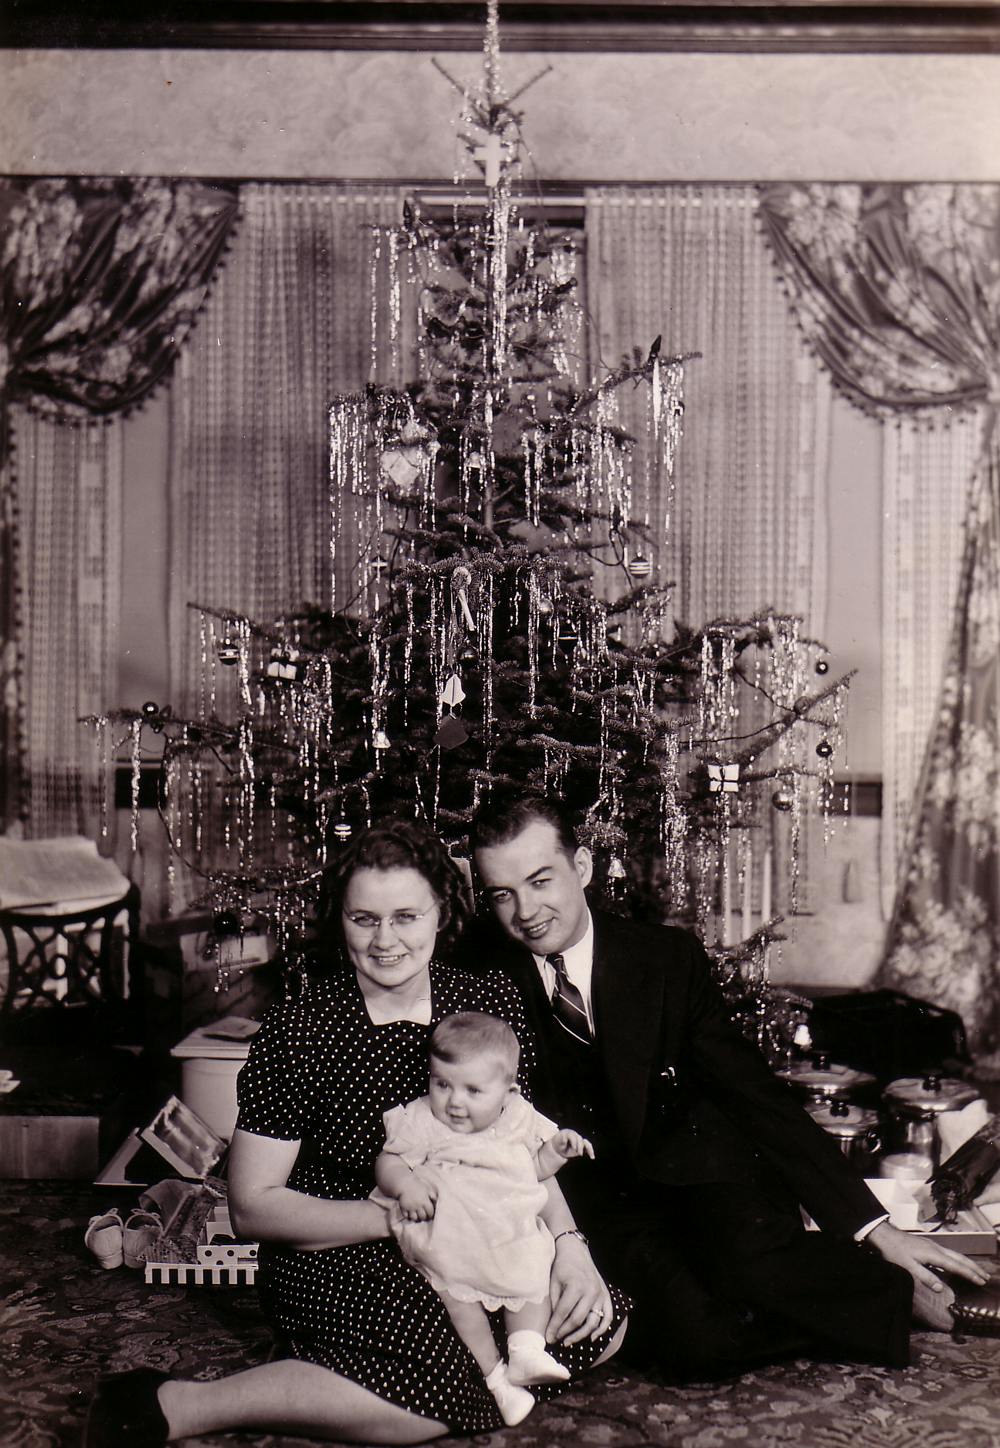 Stanley with his wife and young daughter seated in front of a Christmas tree